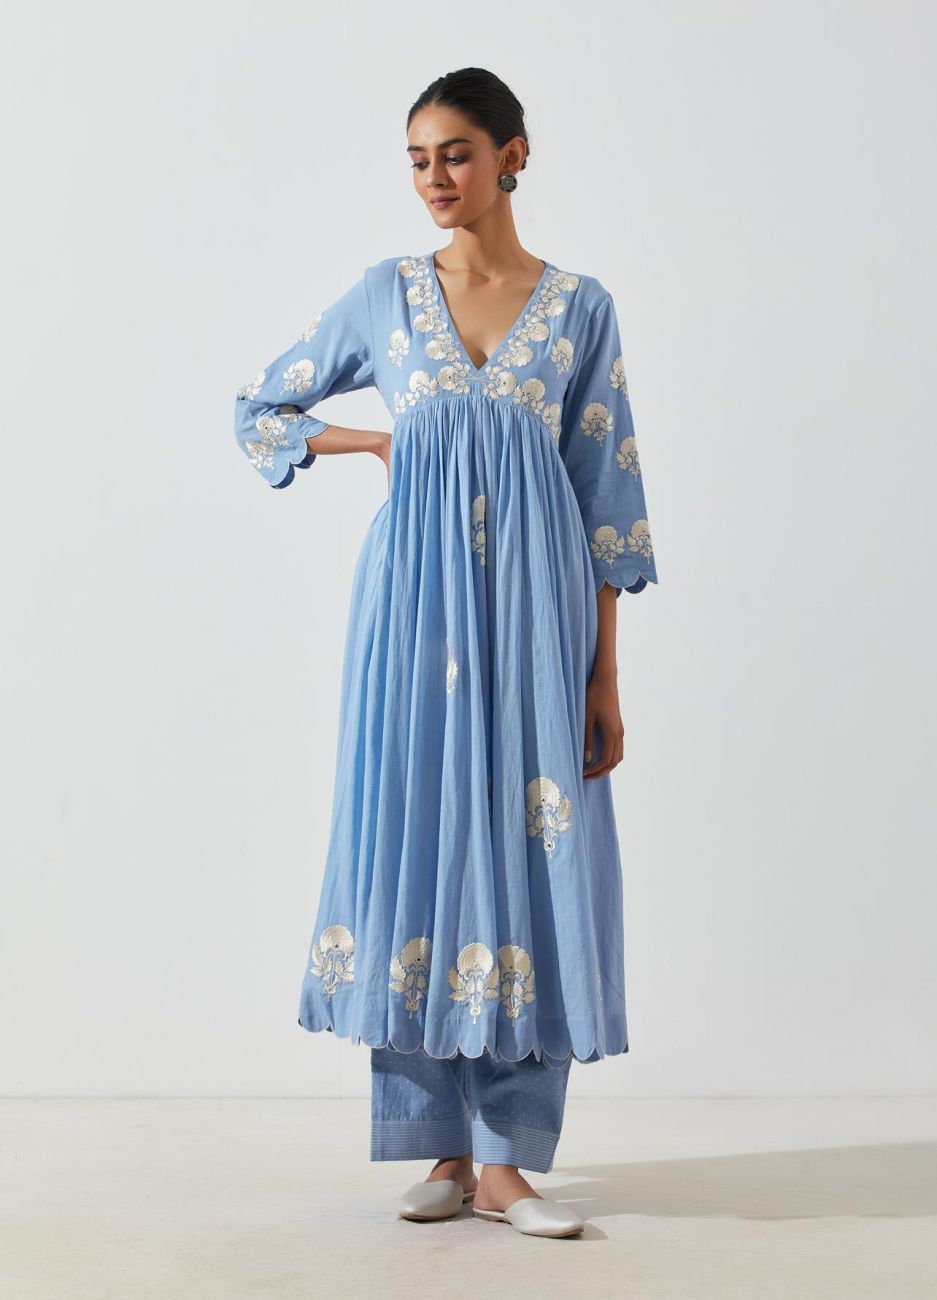 Powder Blue Mogra Kurta Set - Indian Clothing in Denver, CO, Aurora, CO, Boulder, CO, Fort Collins, CO, Colorado Springs, CO, Parker, CO, Highlands Ranch, CO, Cherry Creek, CO, Centennial, CO, and Longmont, CO. Nationwide shipping USA - India Fashion X